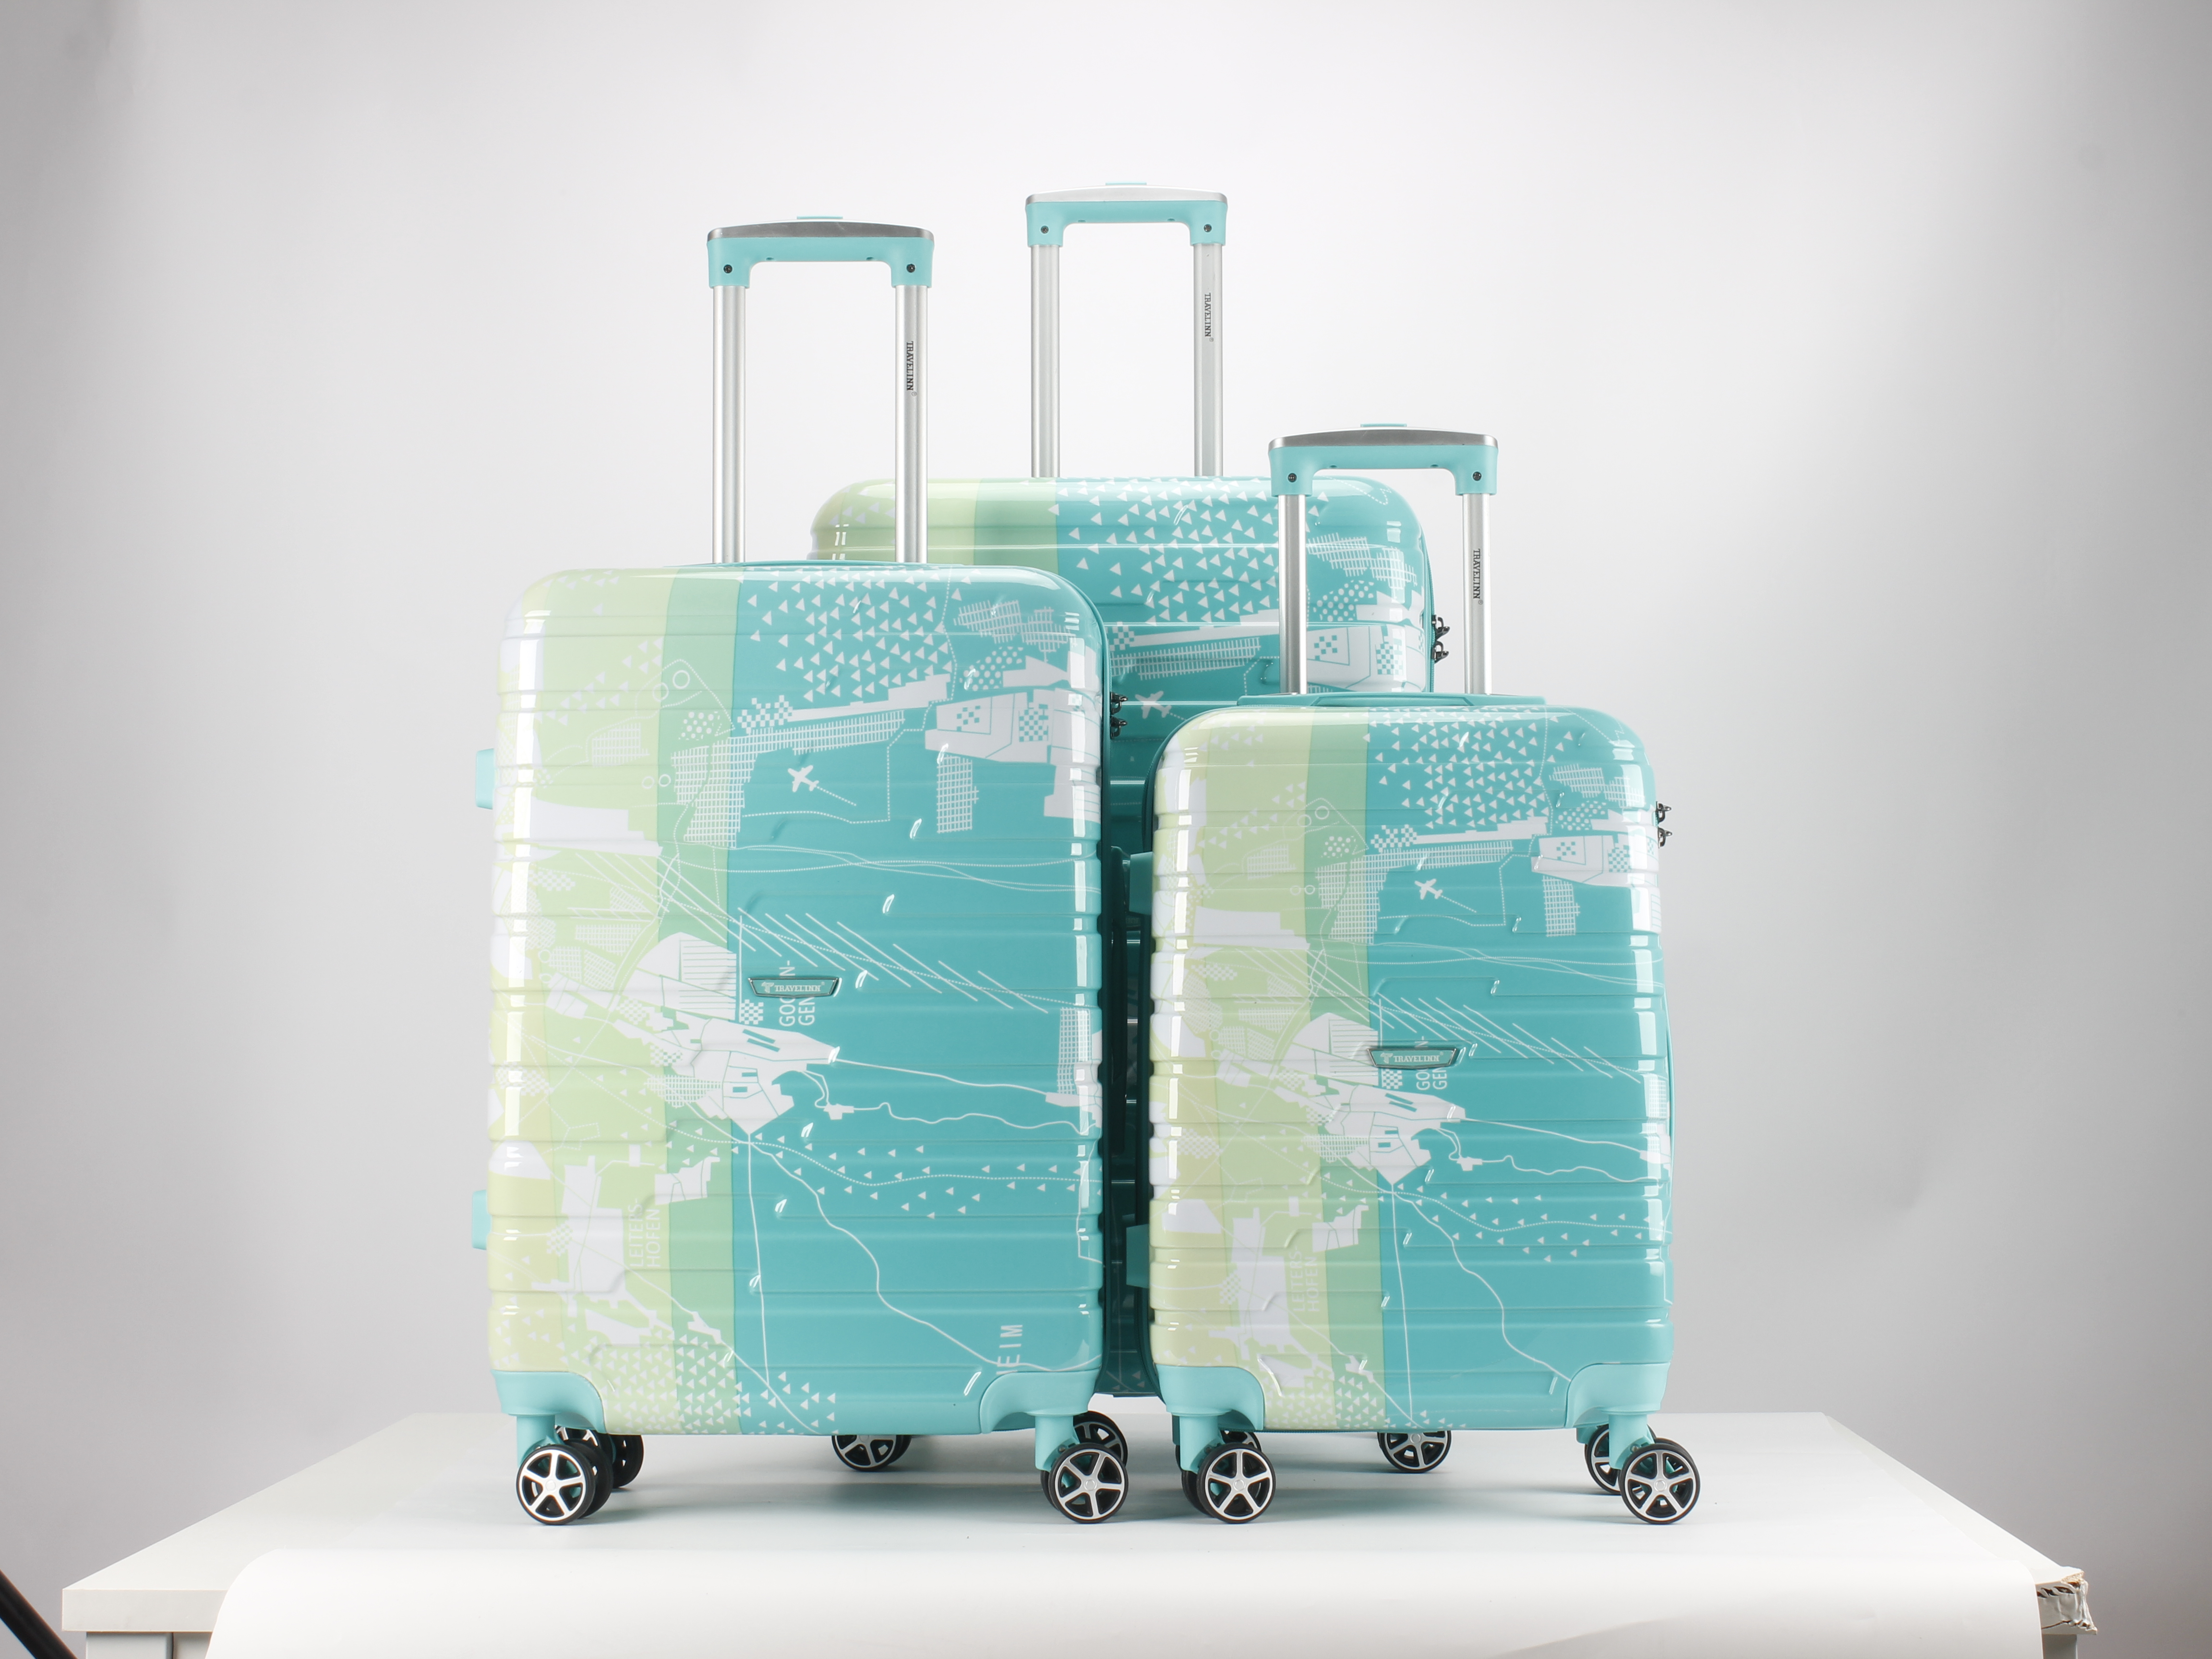 Top Luggage with Innovative Features for Travelers